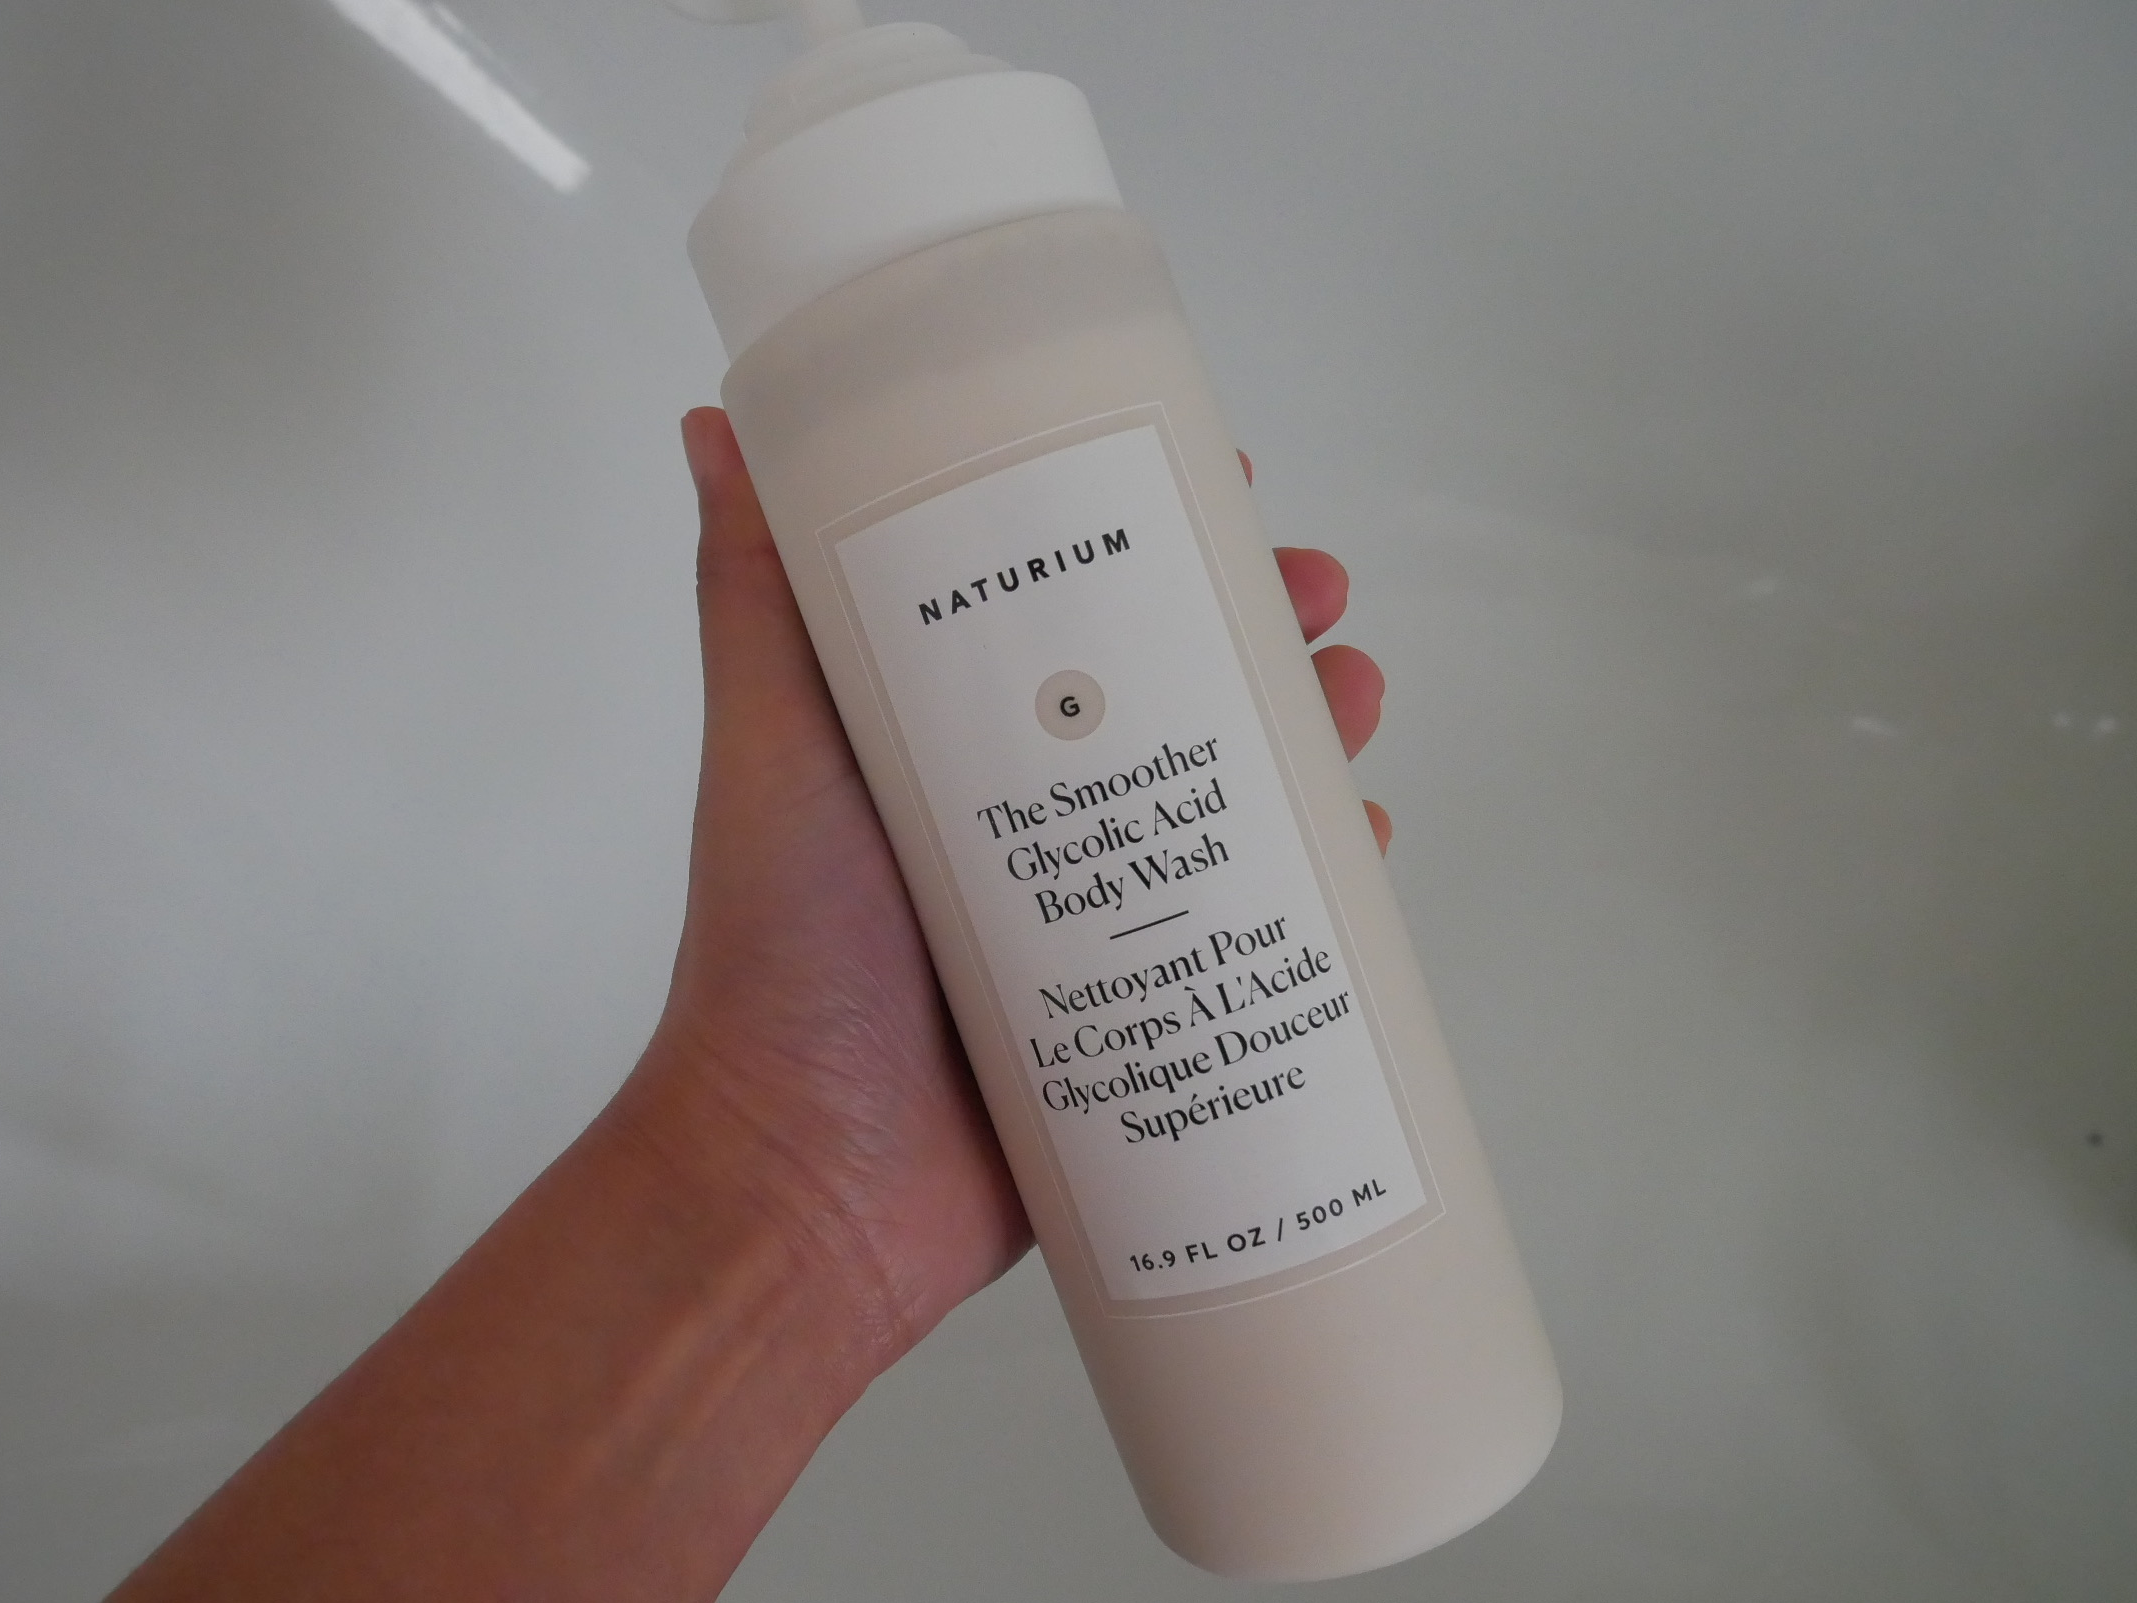 Naturium The Smoother Body Wash Review | Space NK